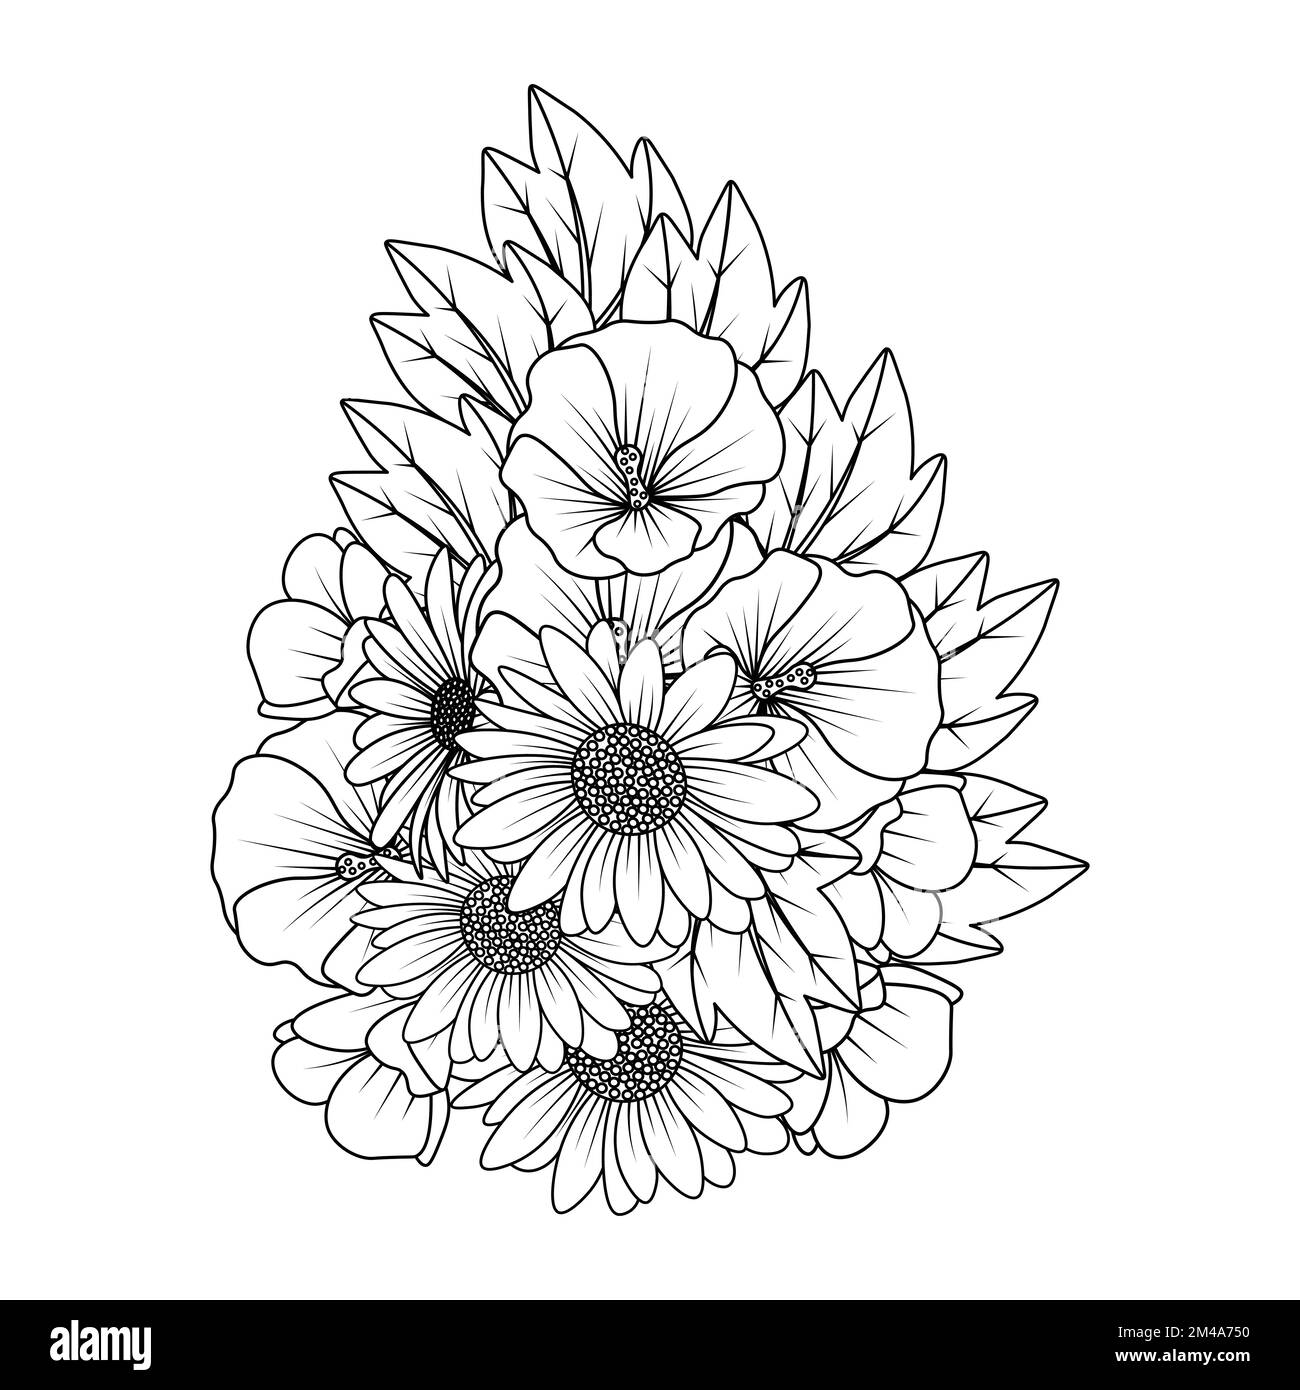 sunflower and hollyhock flower doodle art coloring page with decorative flower background design illustration Stock Vector